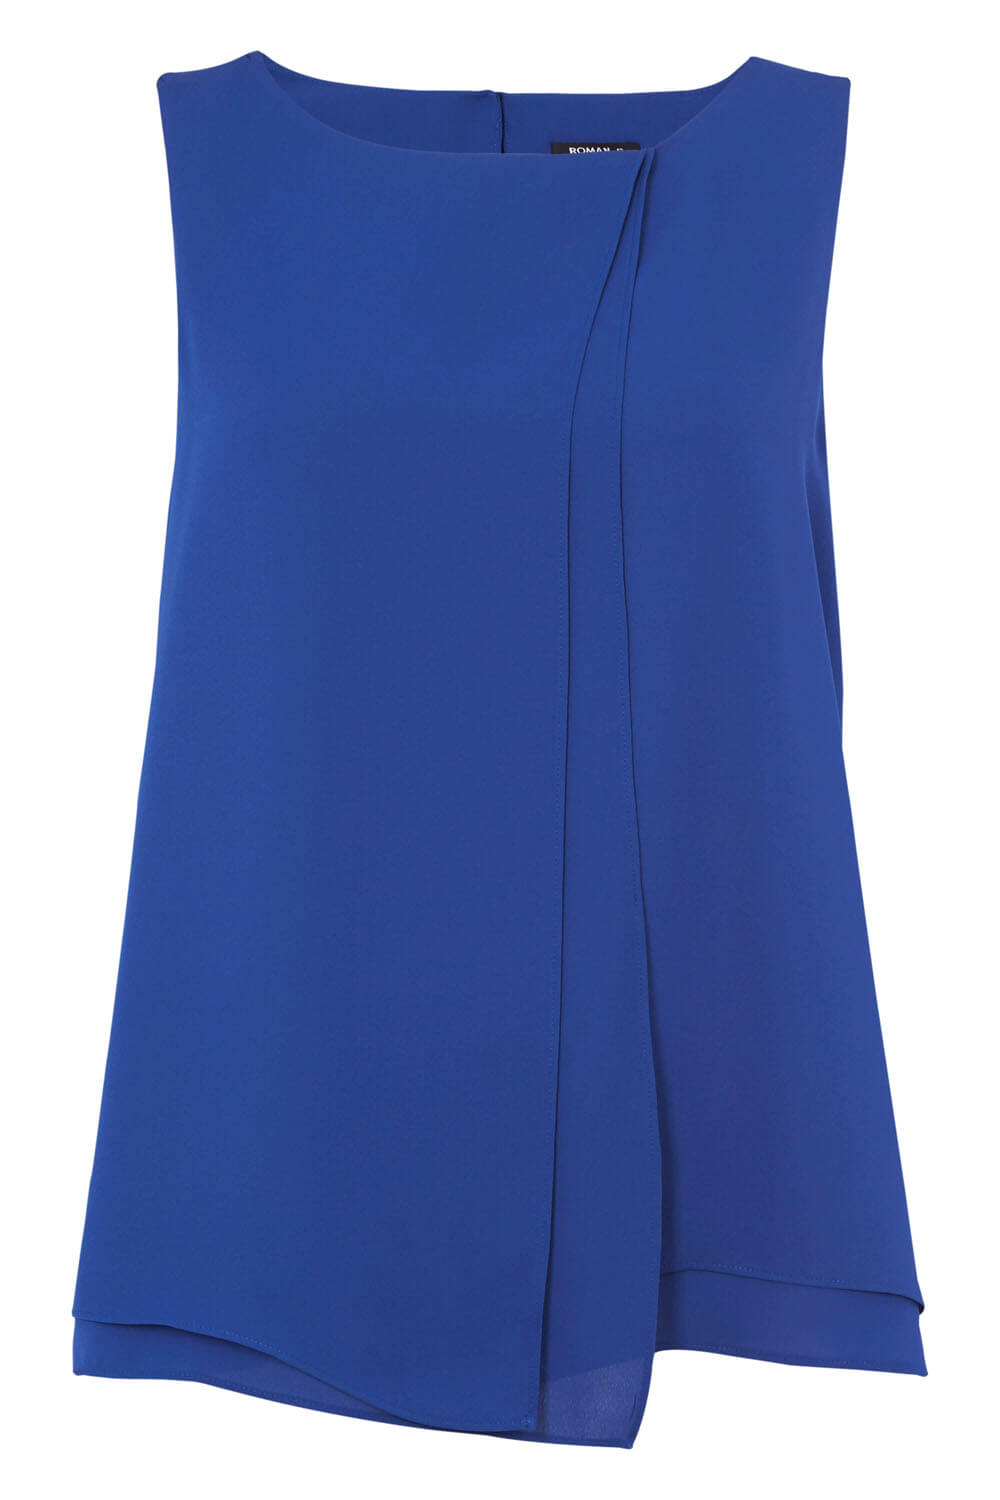 Royal Blue Double Layer Chiffon Top, Image 4 of 8